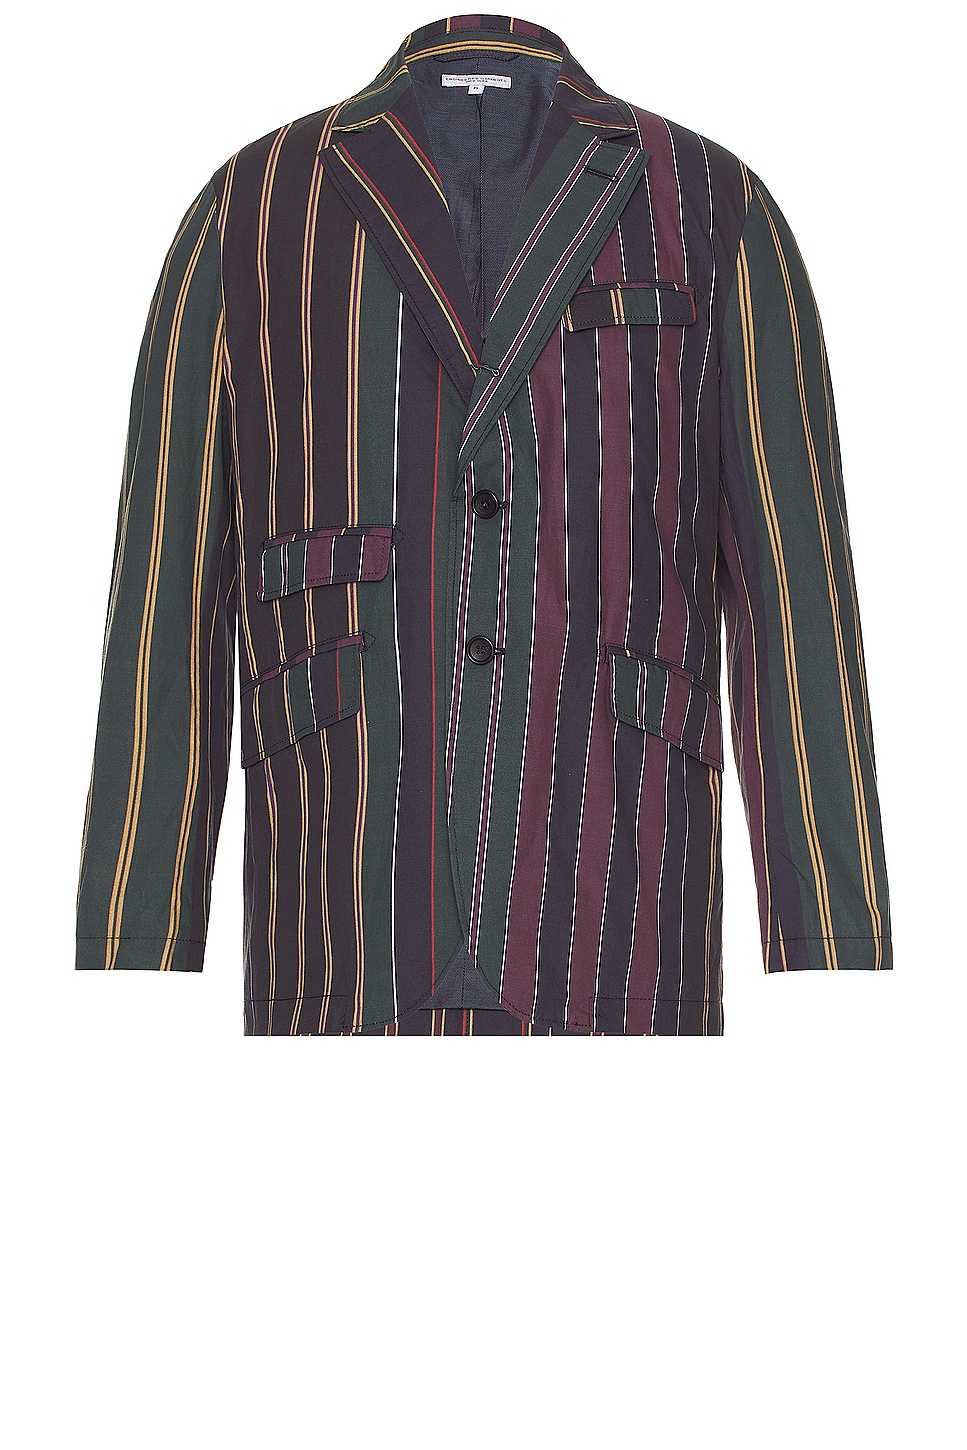 Image 1 of Engineered Garments Andover Jacket in Multi